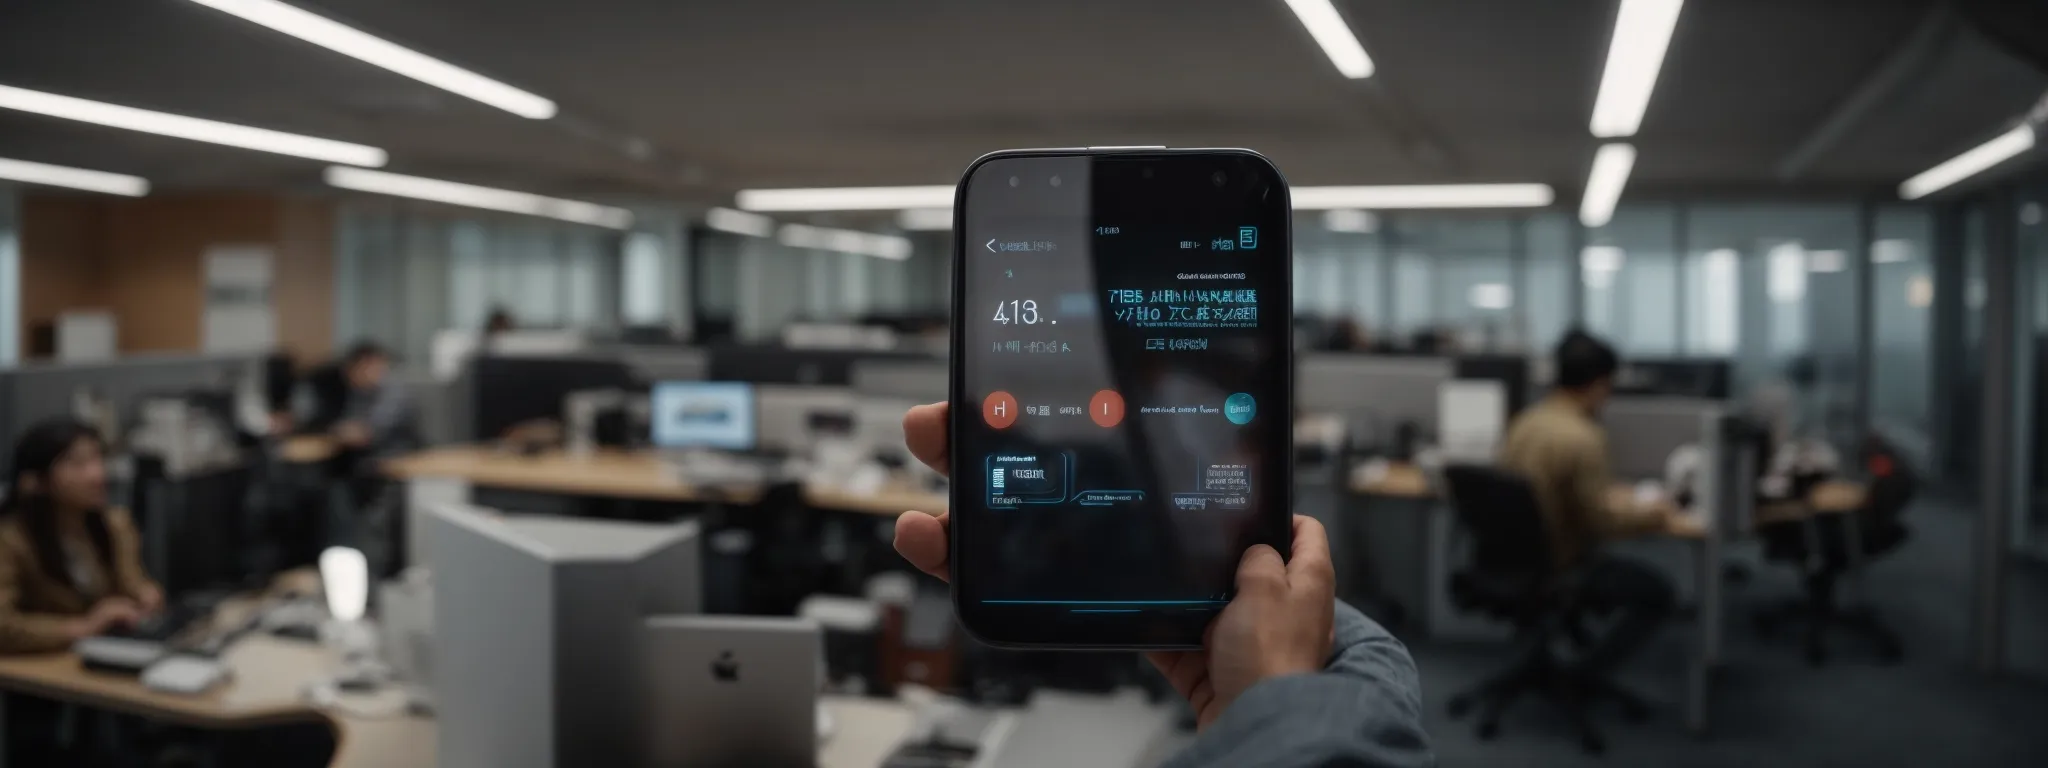 a smartphone displaying a virtual assistant interface on its screen amidst a backdrop of bustling office space emphasizing modern technology adaptation.